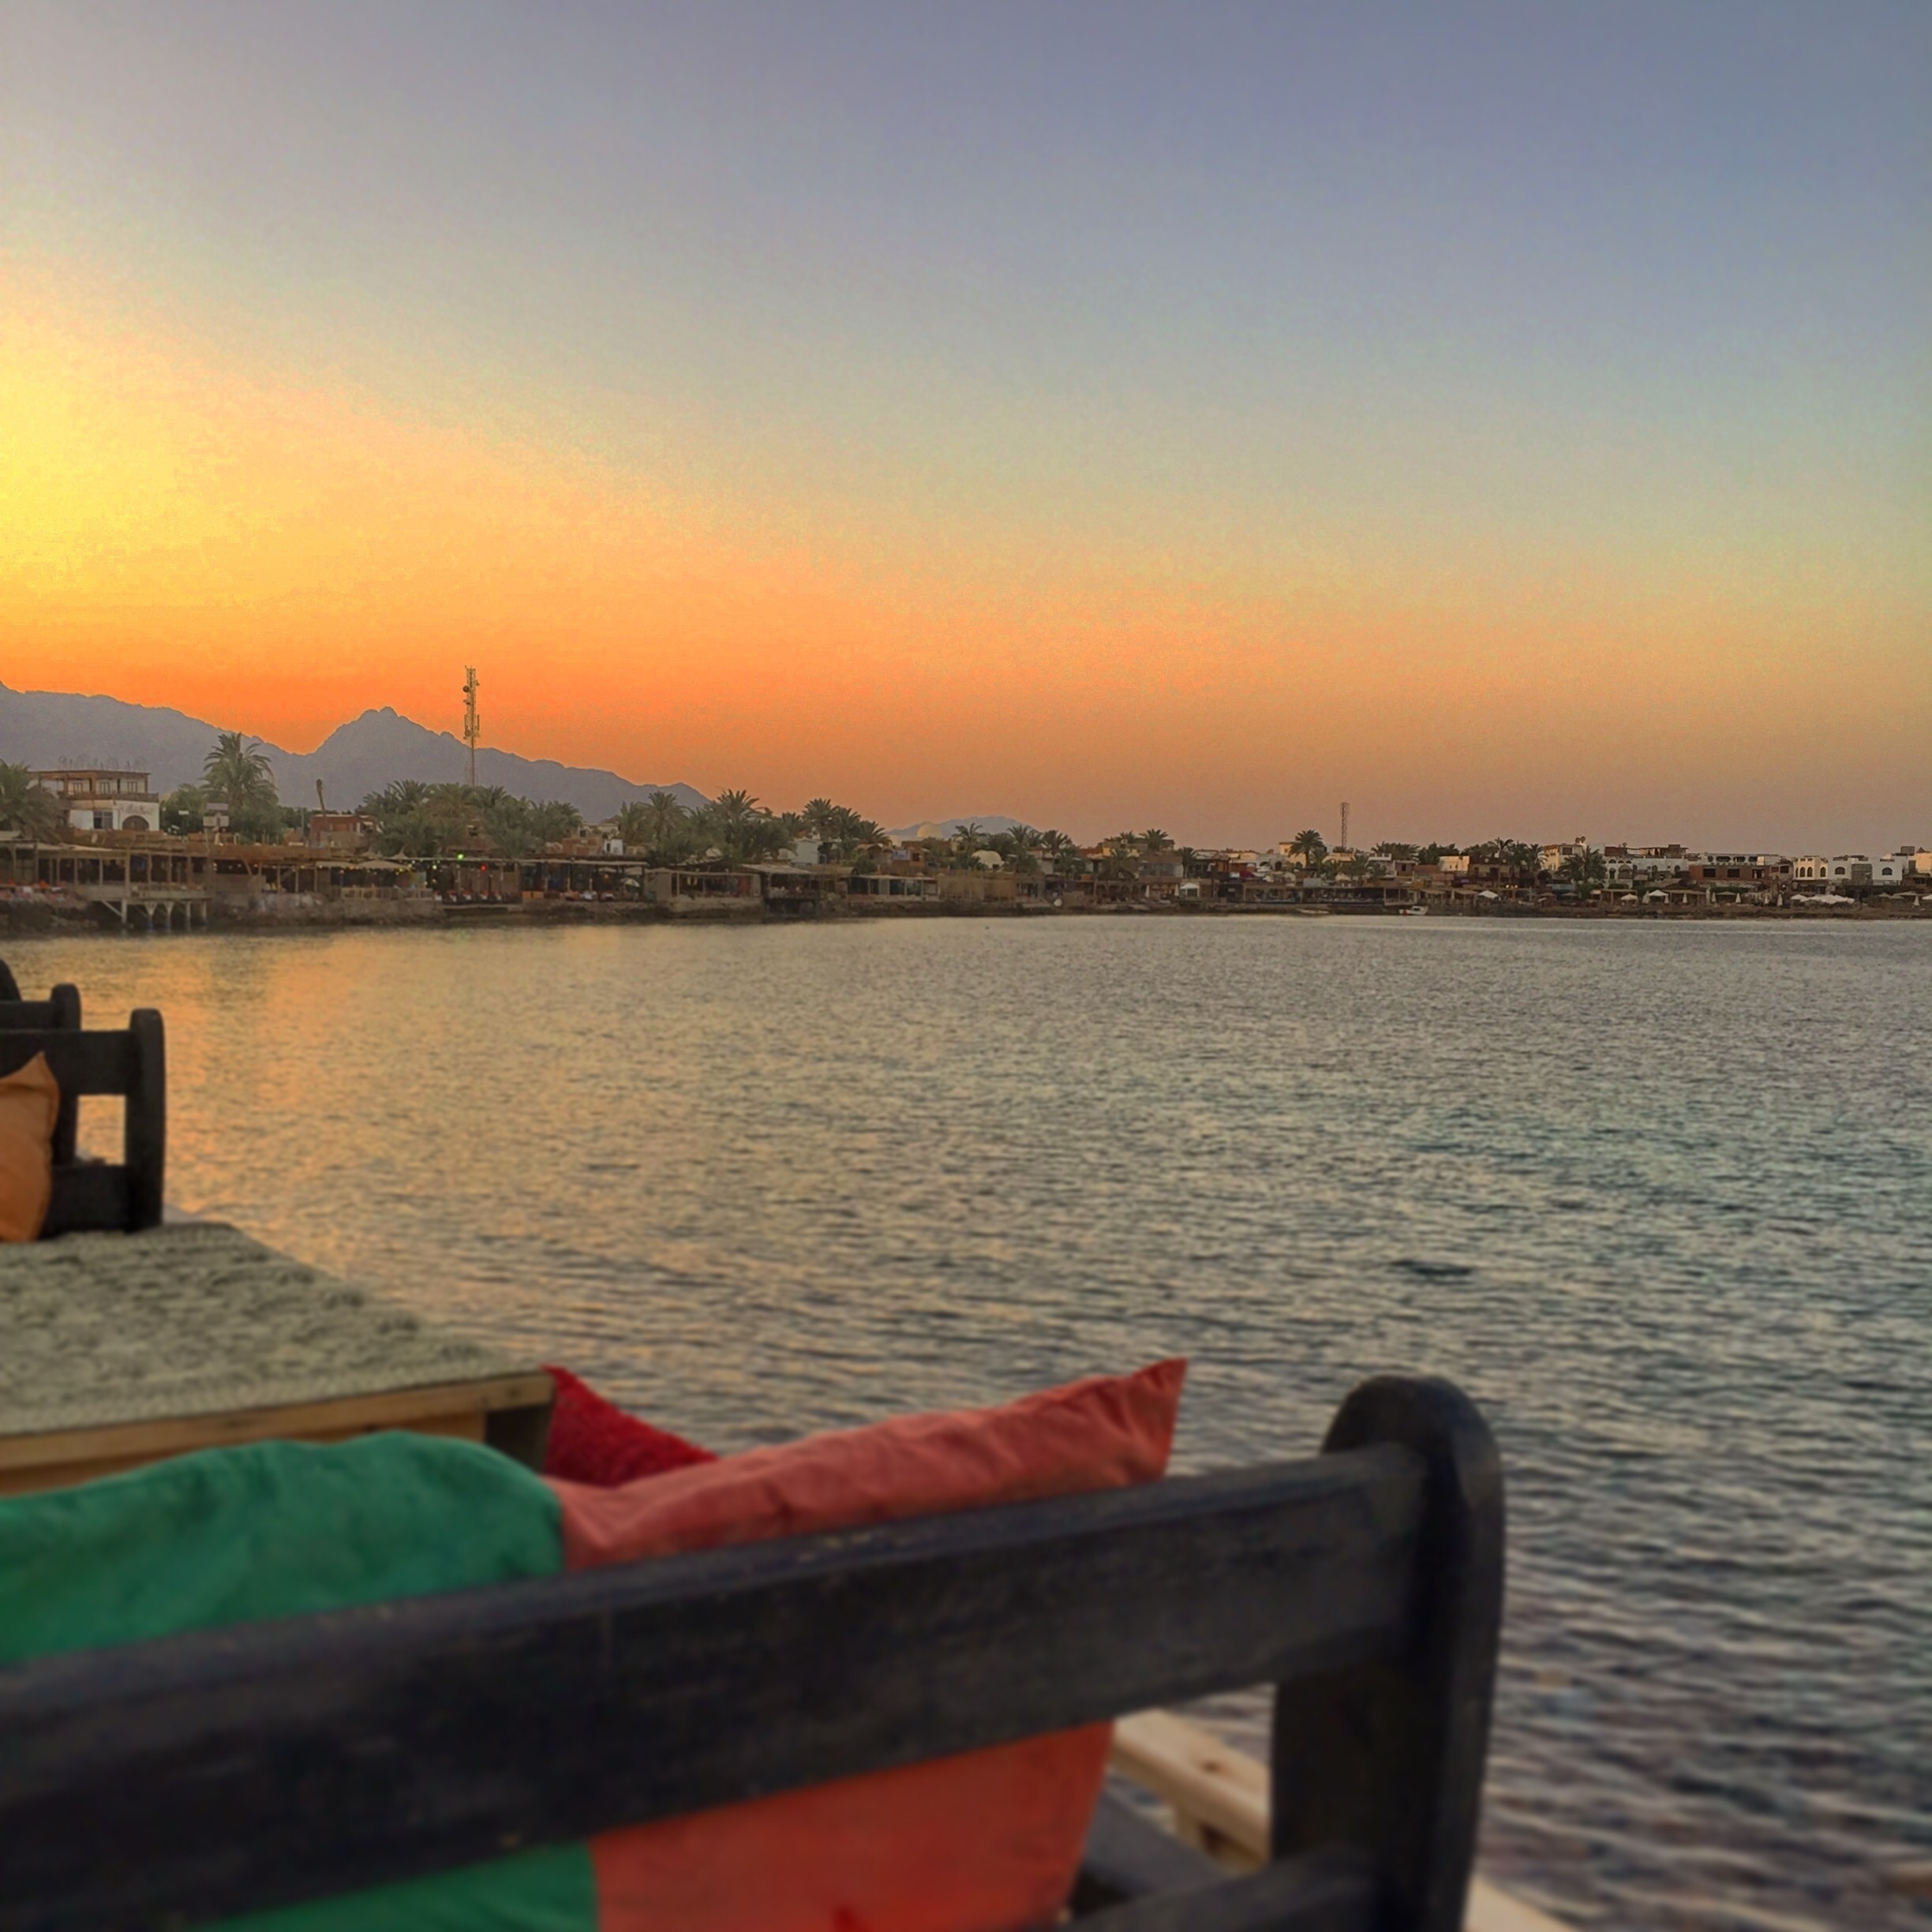 This place ... Words don't do justice for Dahab Egypt! You must visit my friends at Same Same but different for the best thickshake of your life! #waterlust #egypt #dahab #redsea